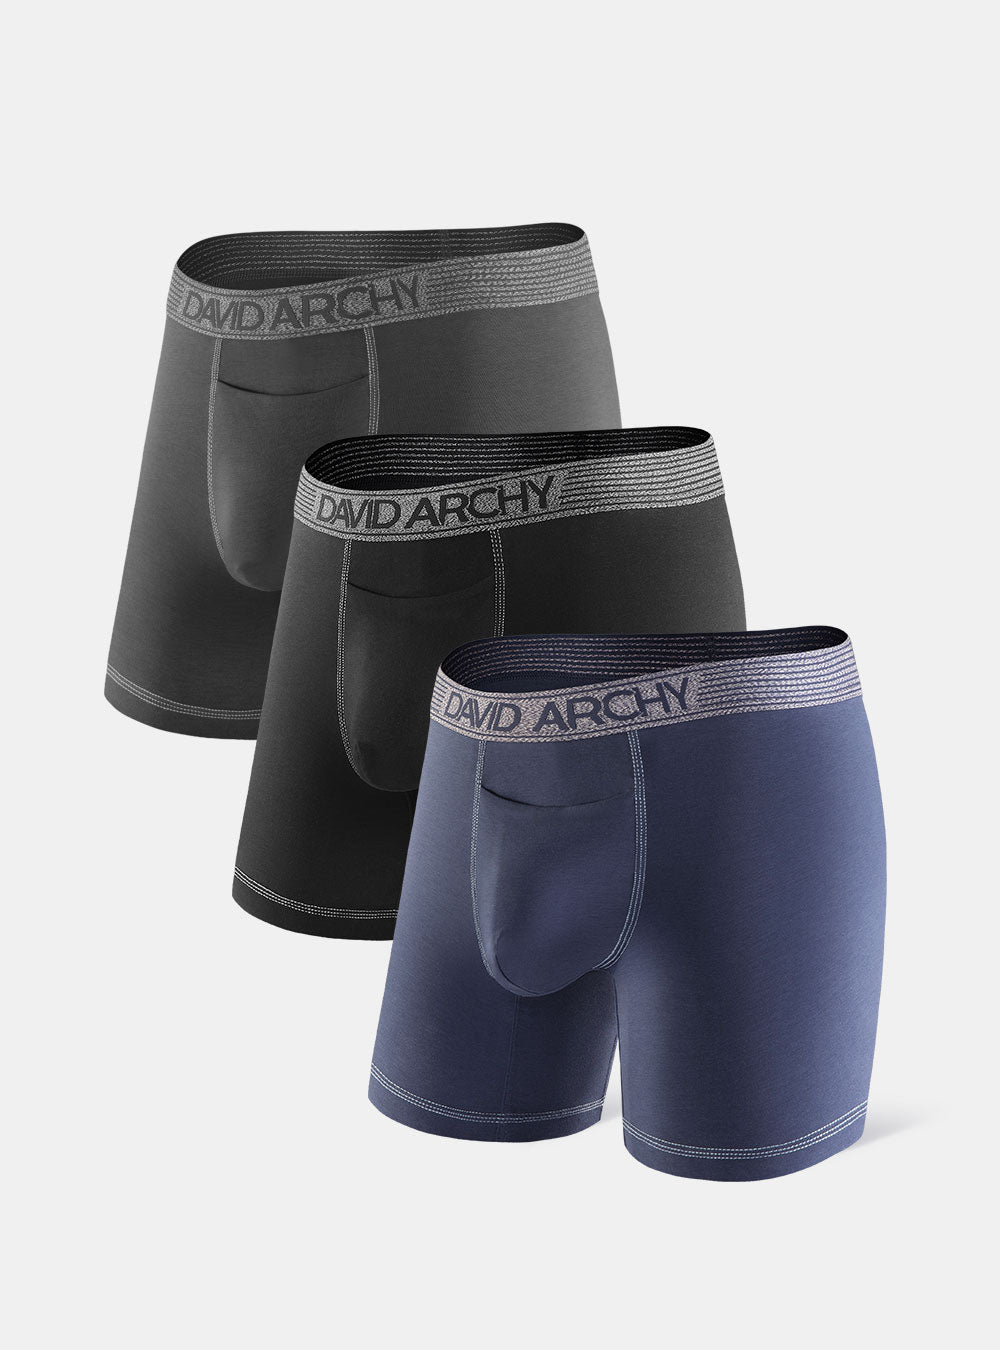 DAVID ARCHY Men's 4 Pack Micro Modal Separate Pouch Briefs with Fly